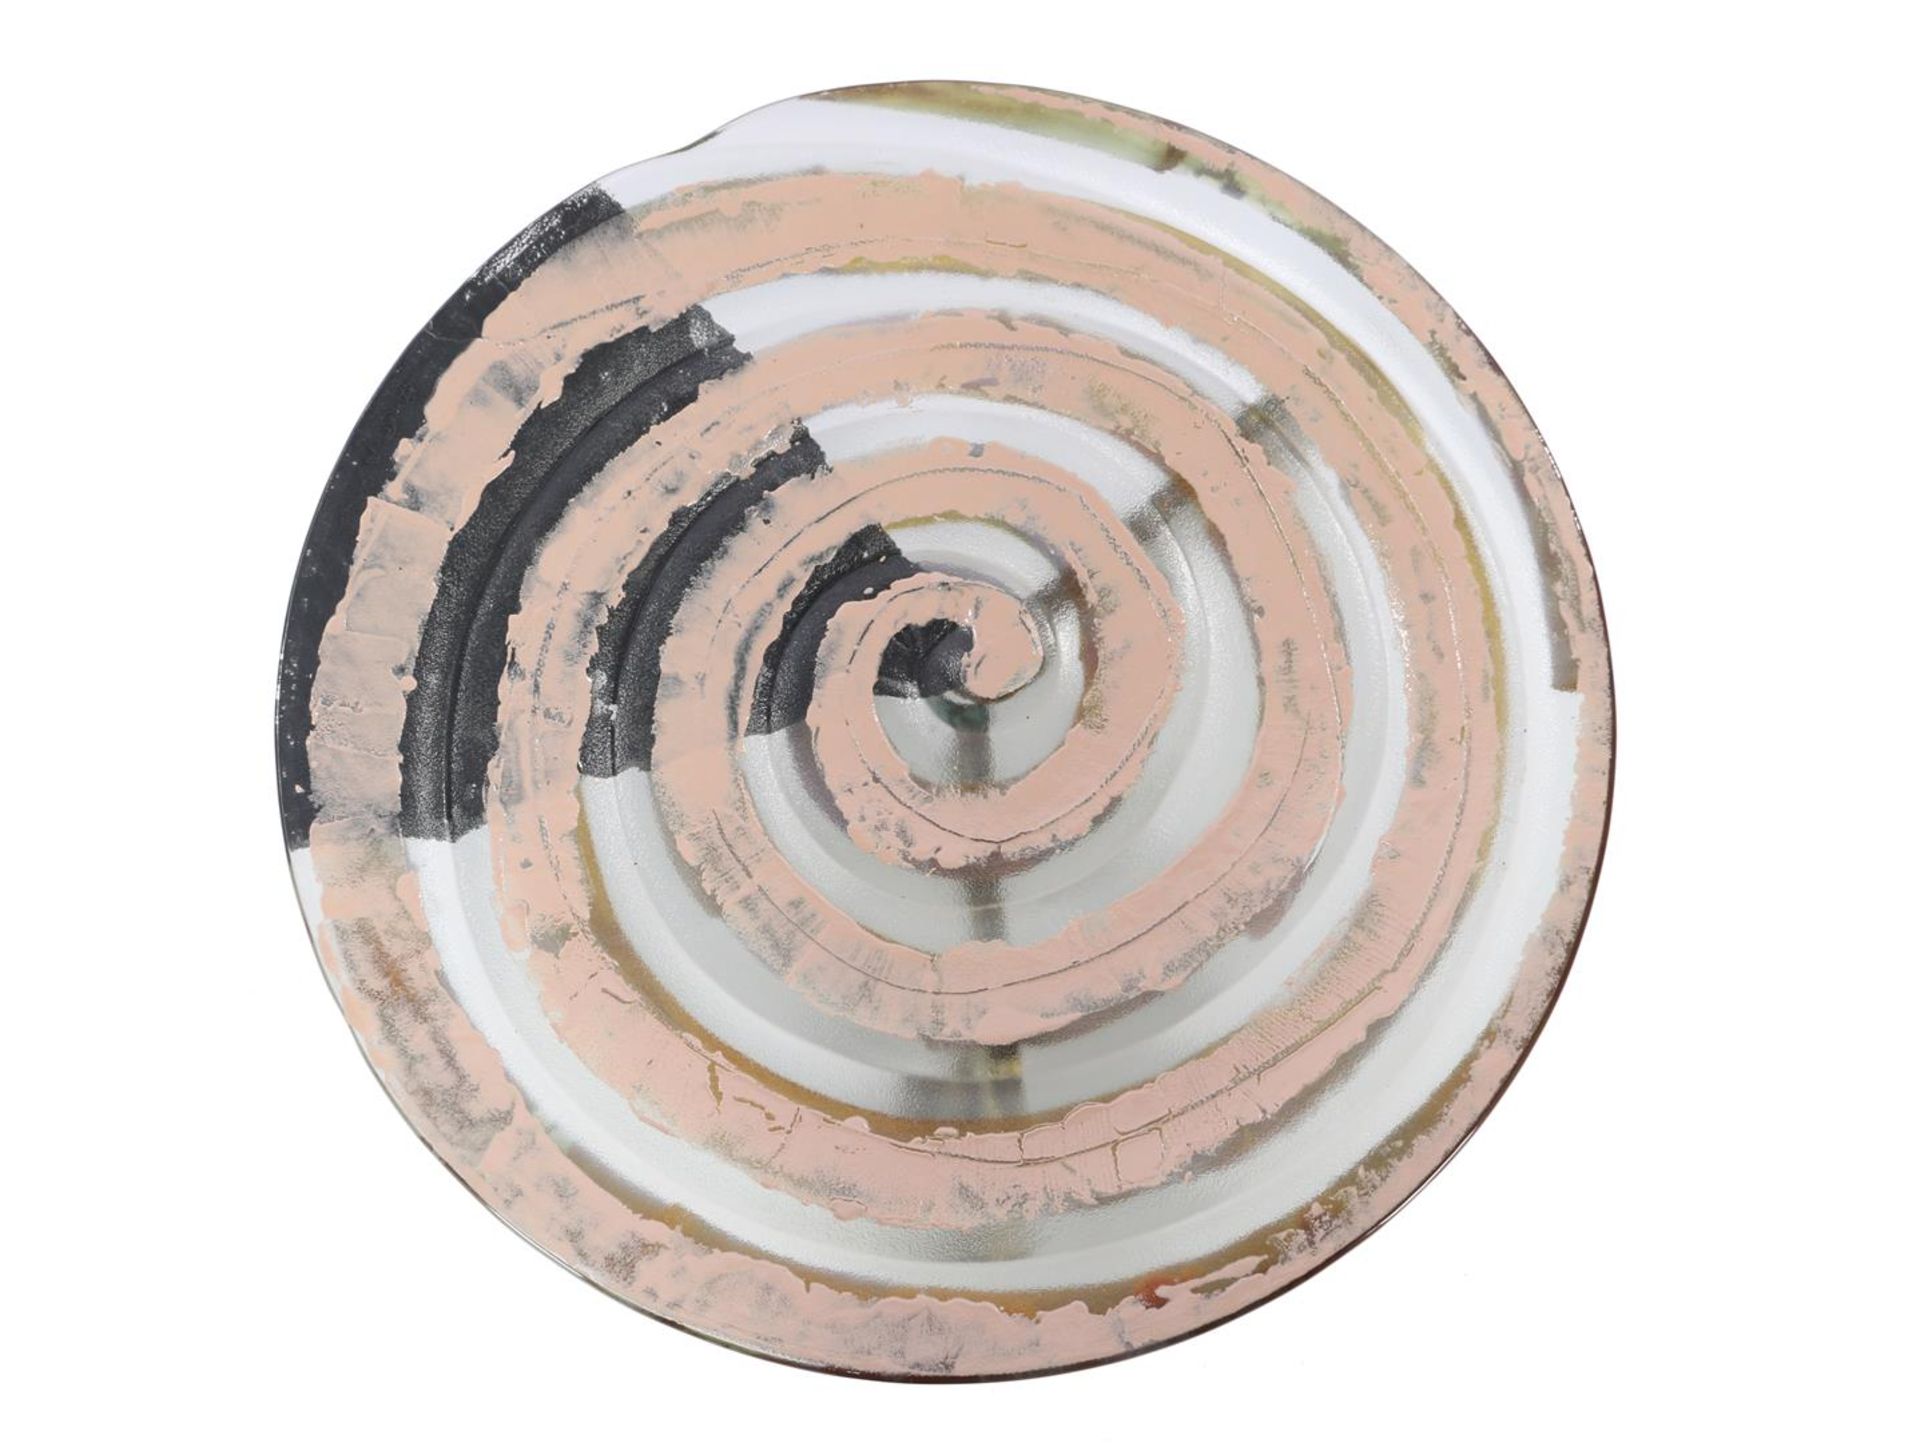 Decorative glass bowl with spiral print on copper truss & nbsp; base, 89 cm diameter - Image 2 of 2